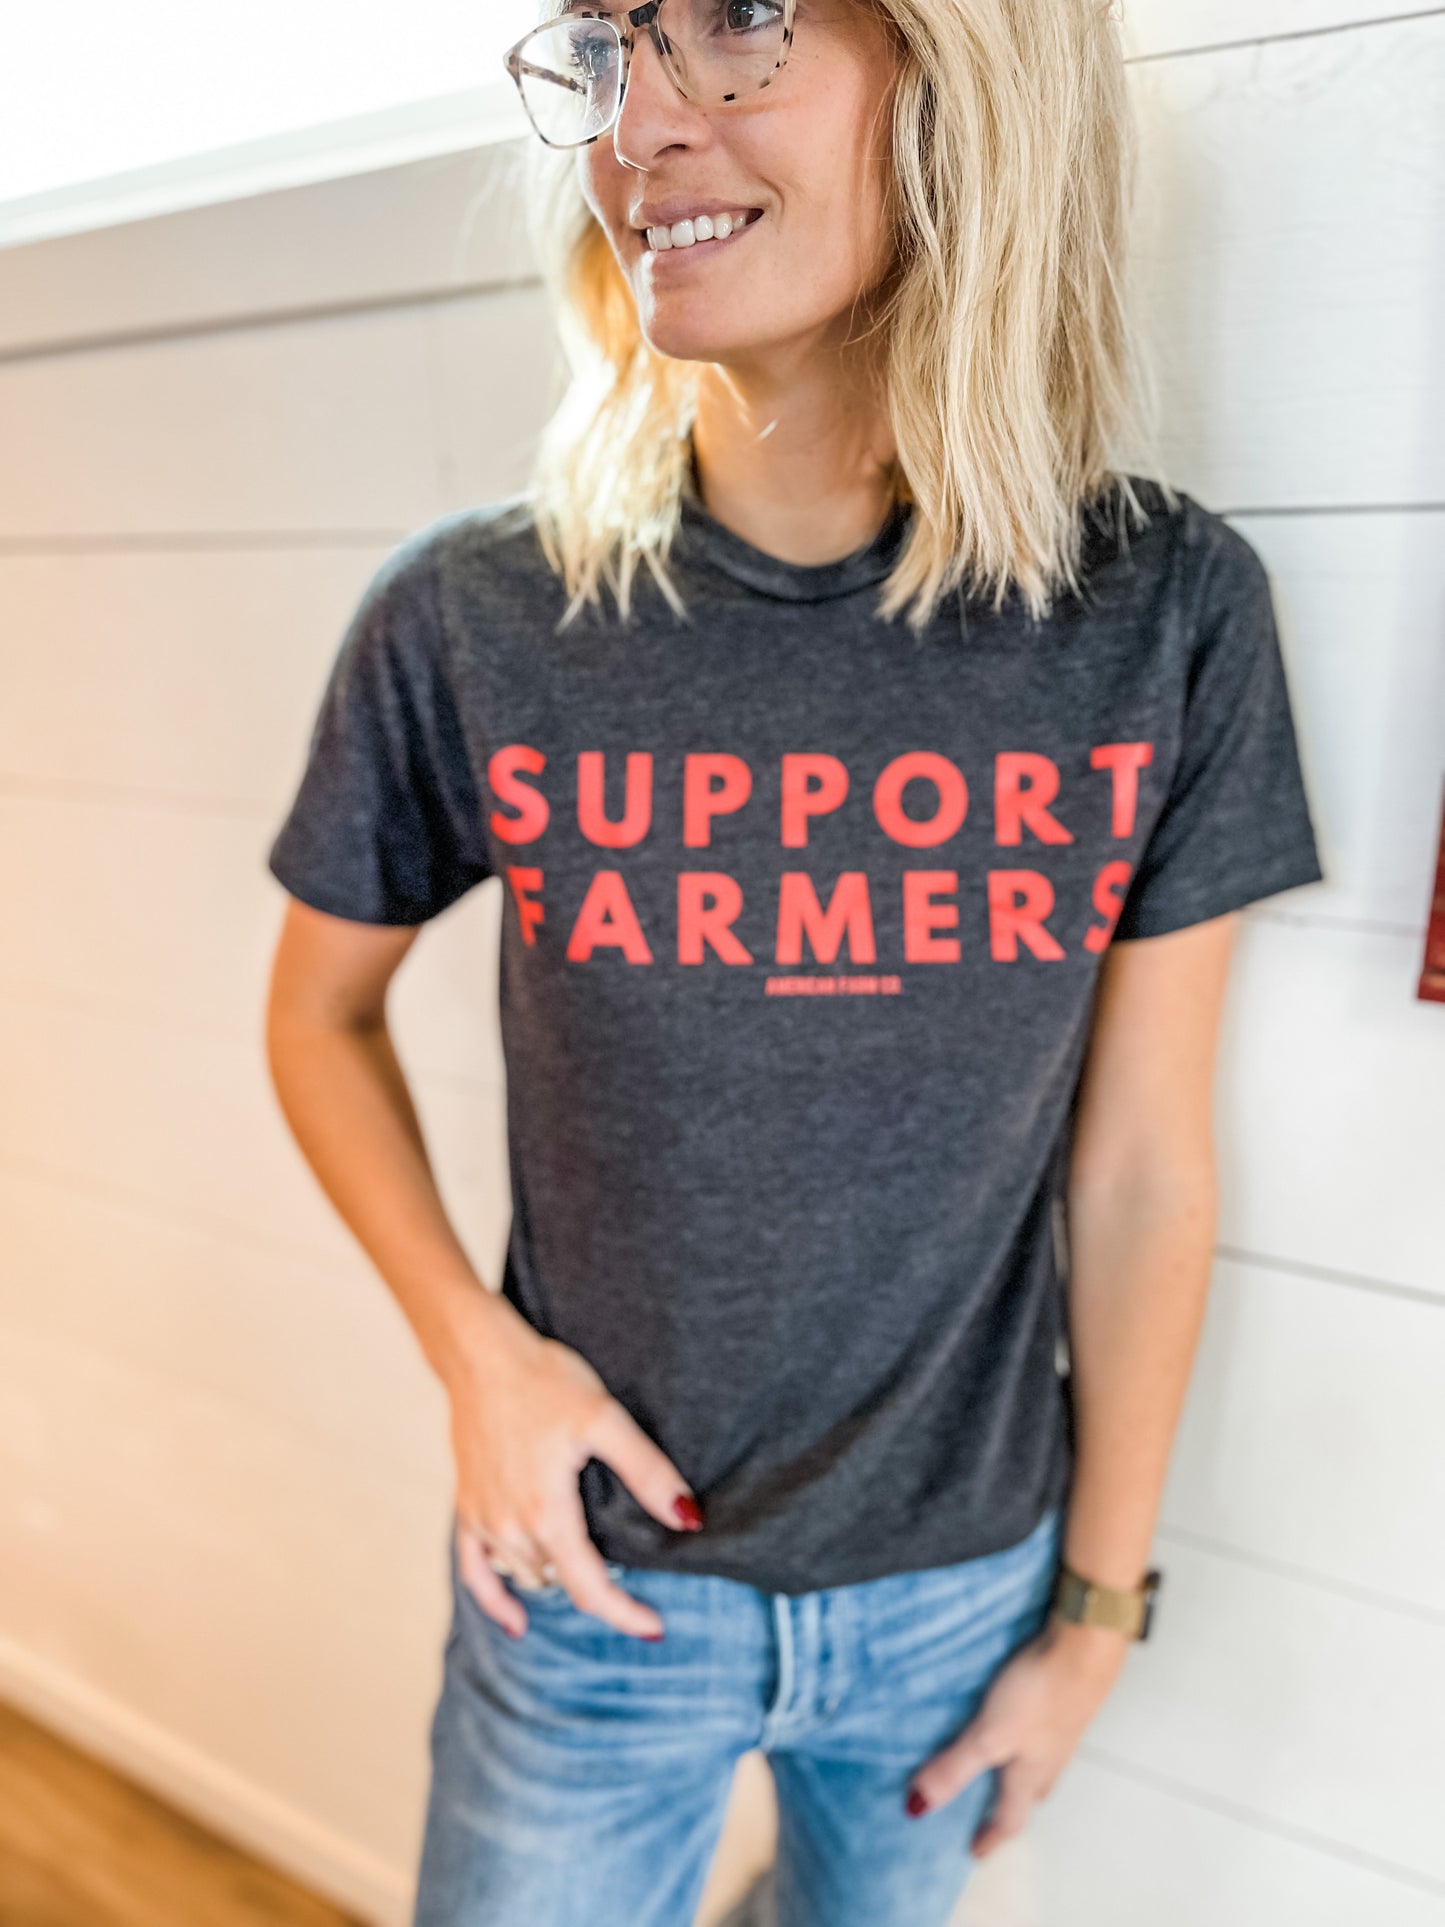 'Support Farmers' Charcoal Tee